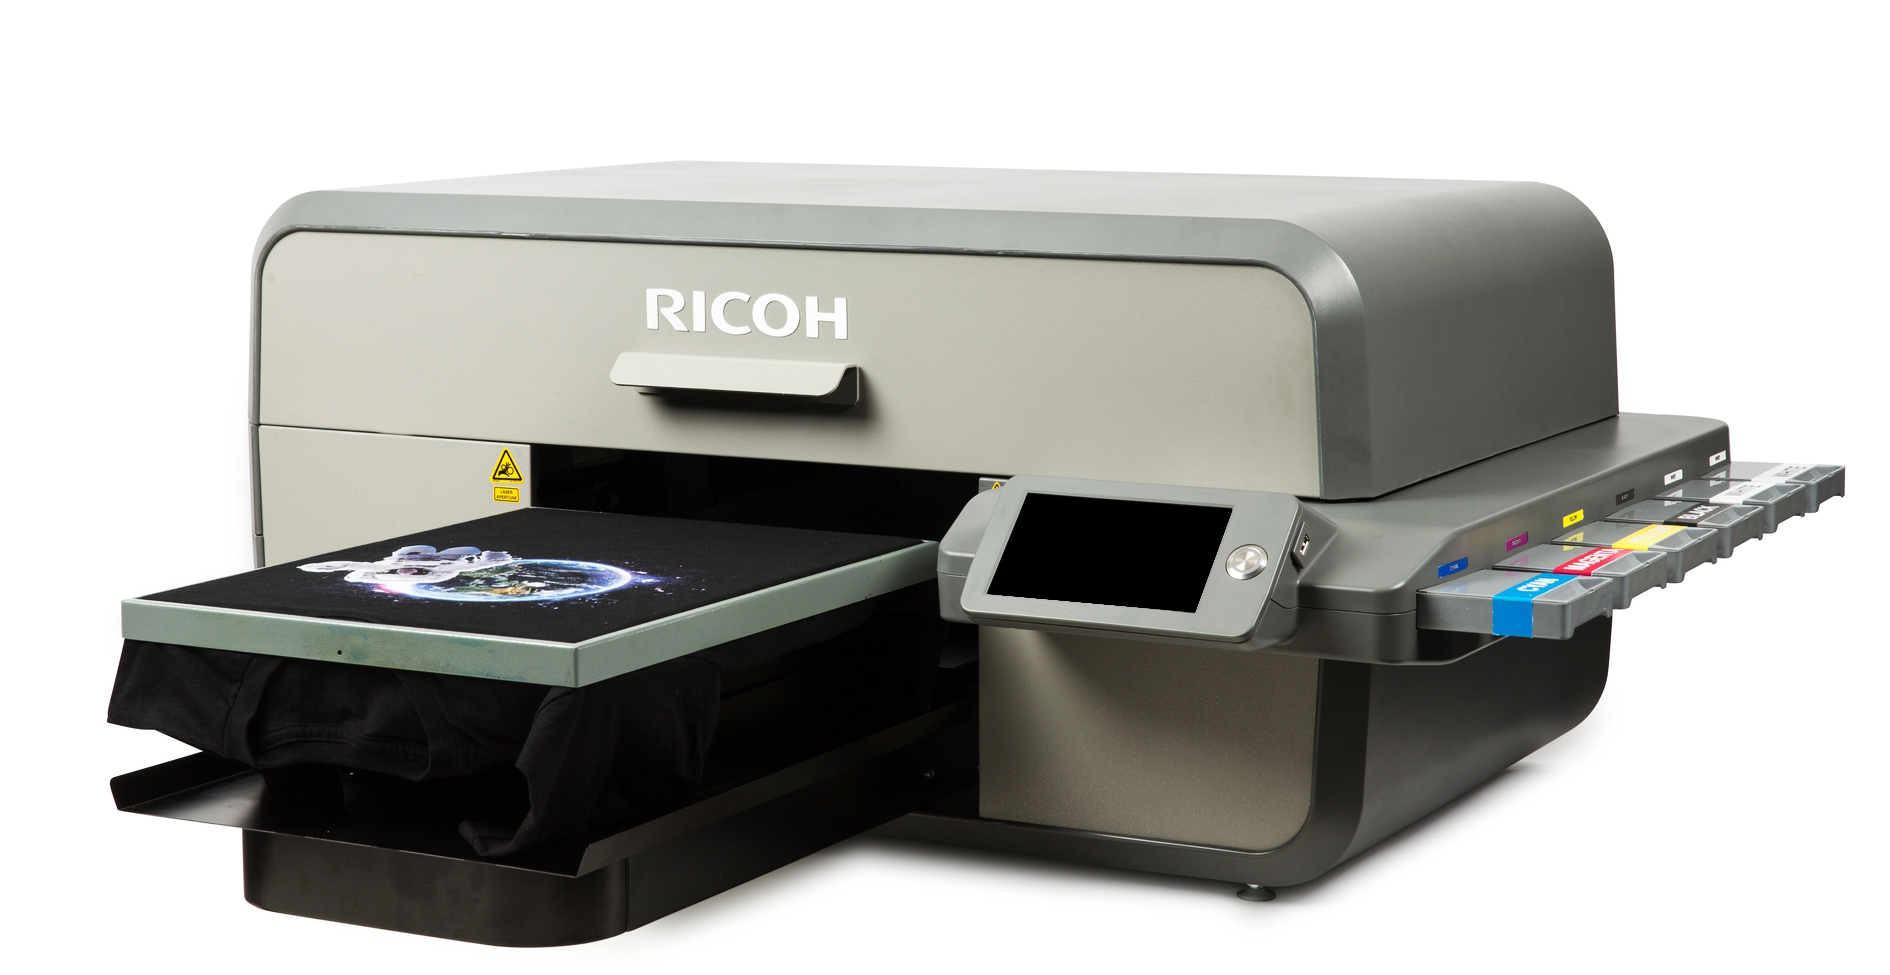 Ricoh launches two new Direct to Garment printers 